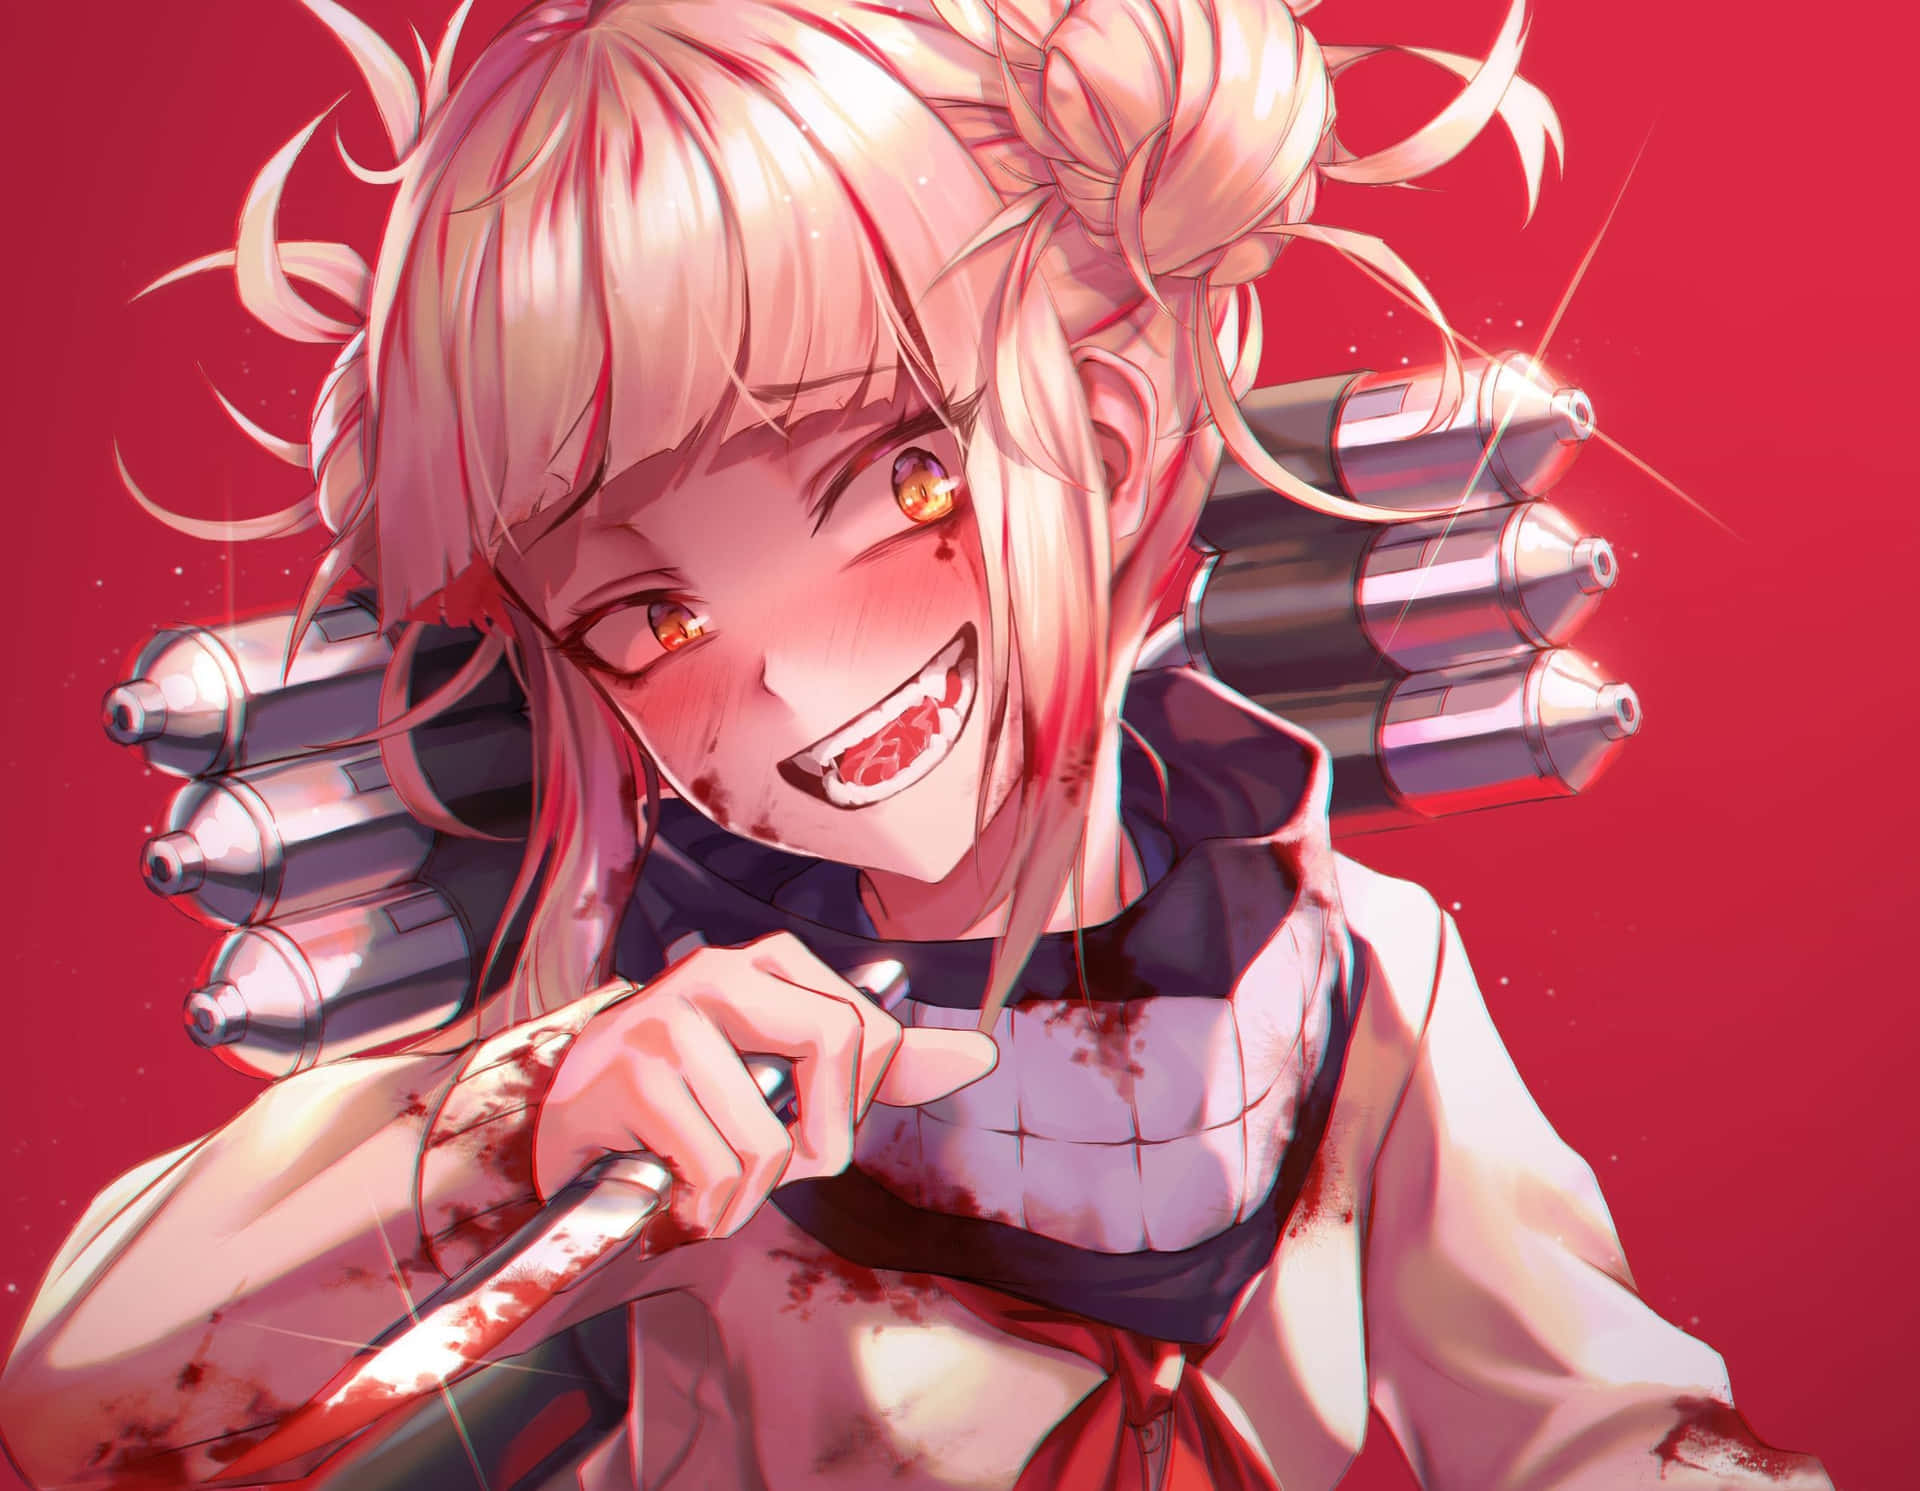 Grinning Himiko Toga Aesthetic With A Knife Wallpaper